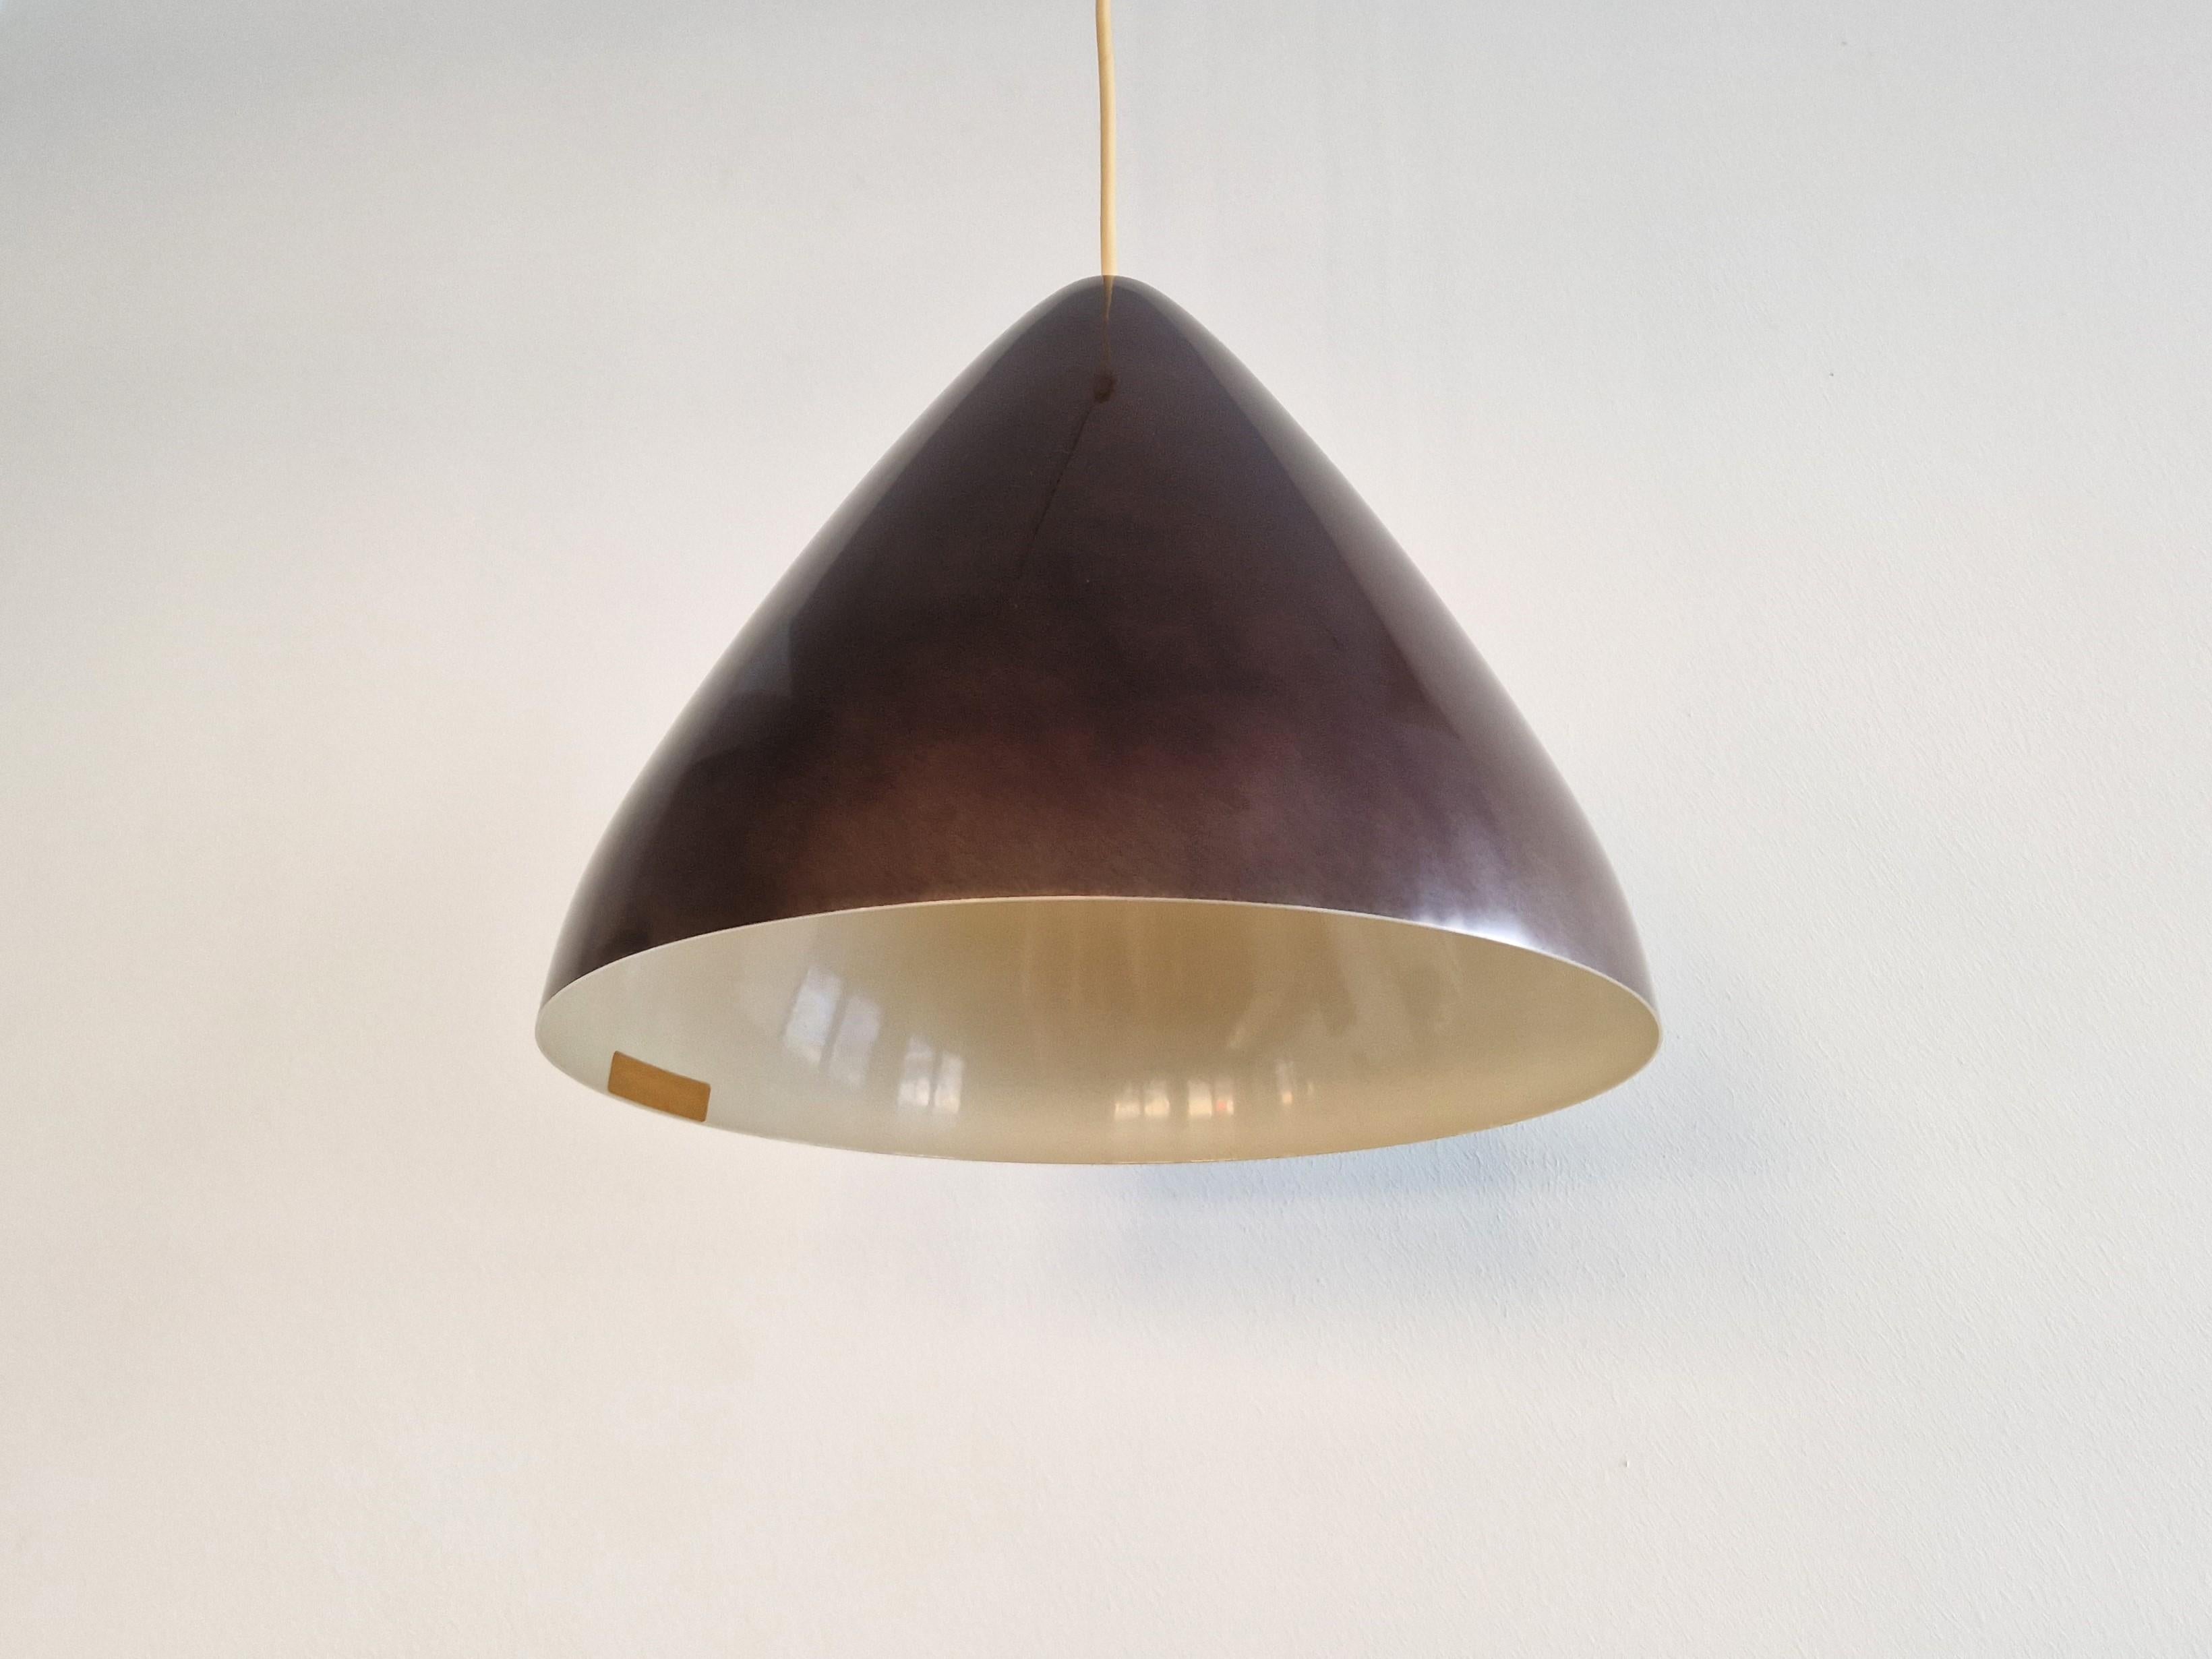 Mid-Century Modern Dark wine red conical pendant lamp by Lisa Johansson-Pape for Orno, Finland 1960 For Sale